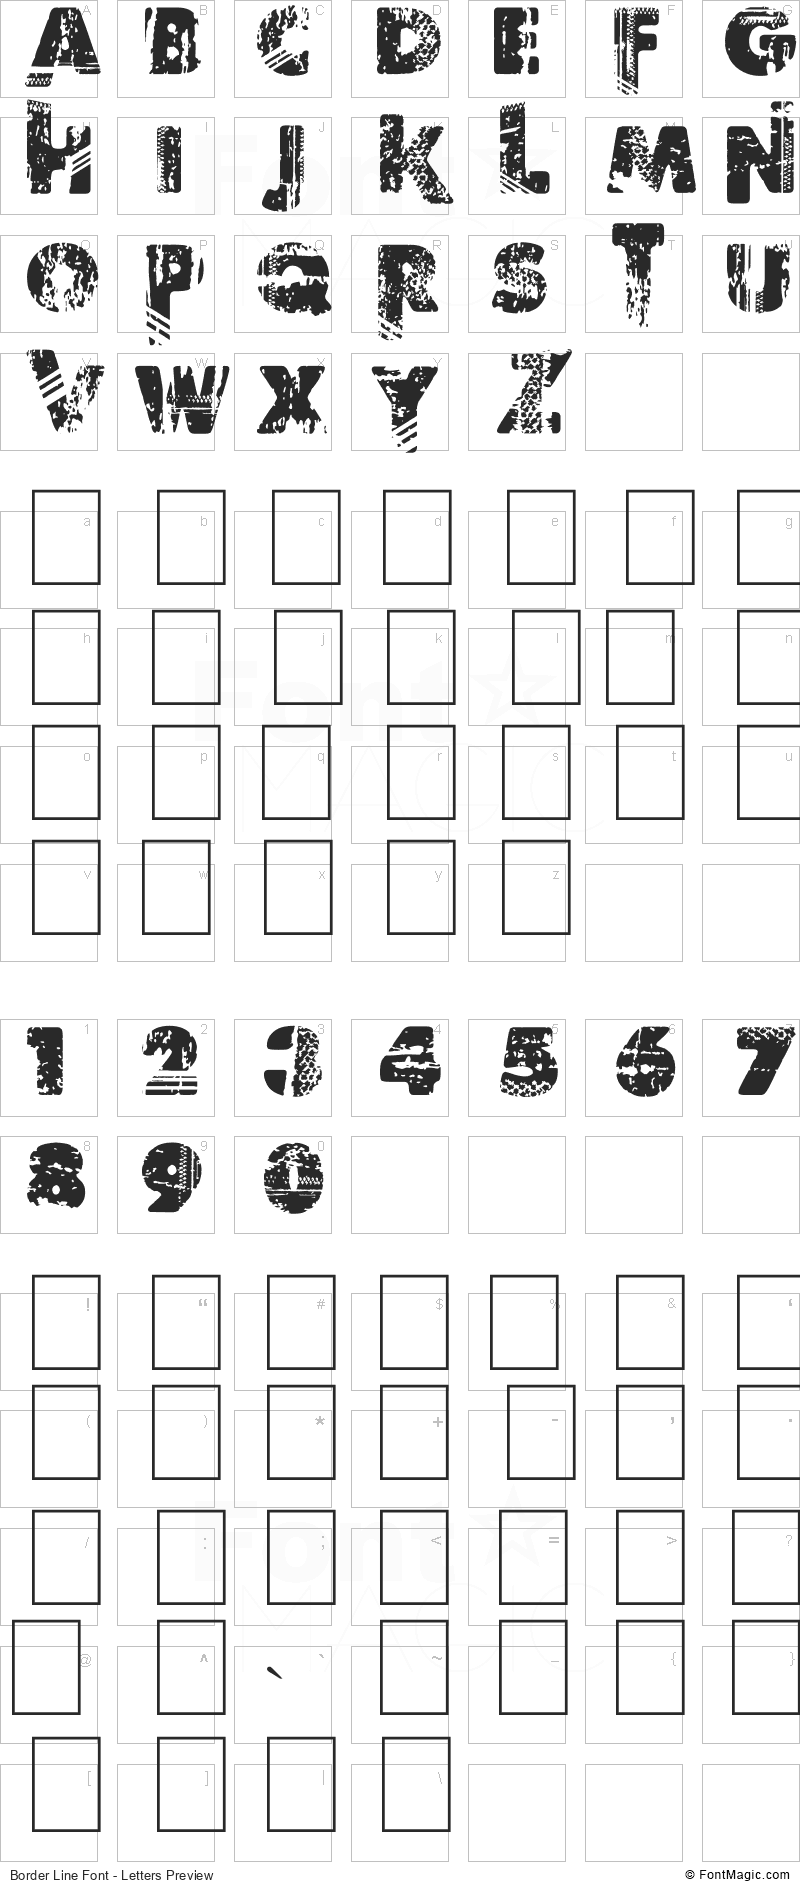 Border Line Font - All Latters Preview Chart